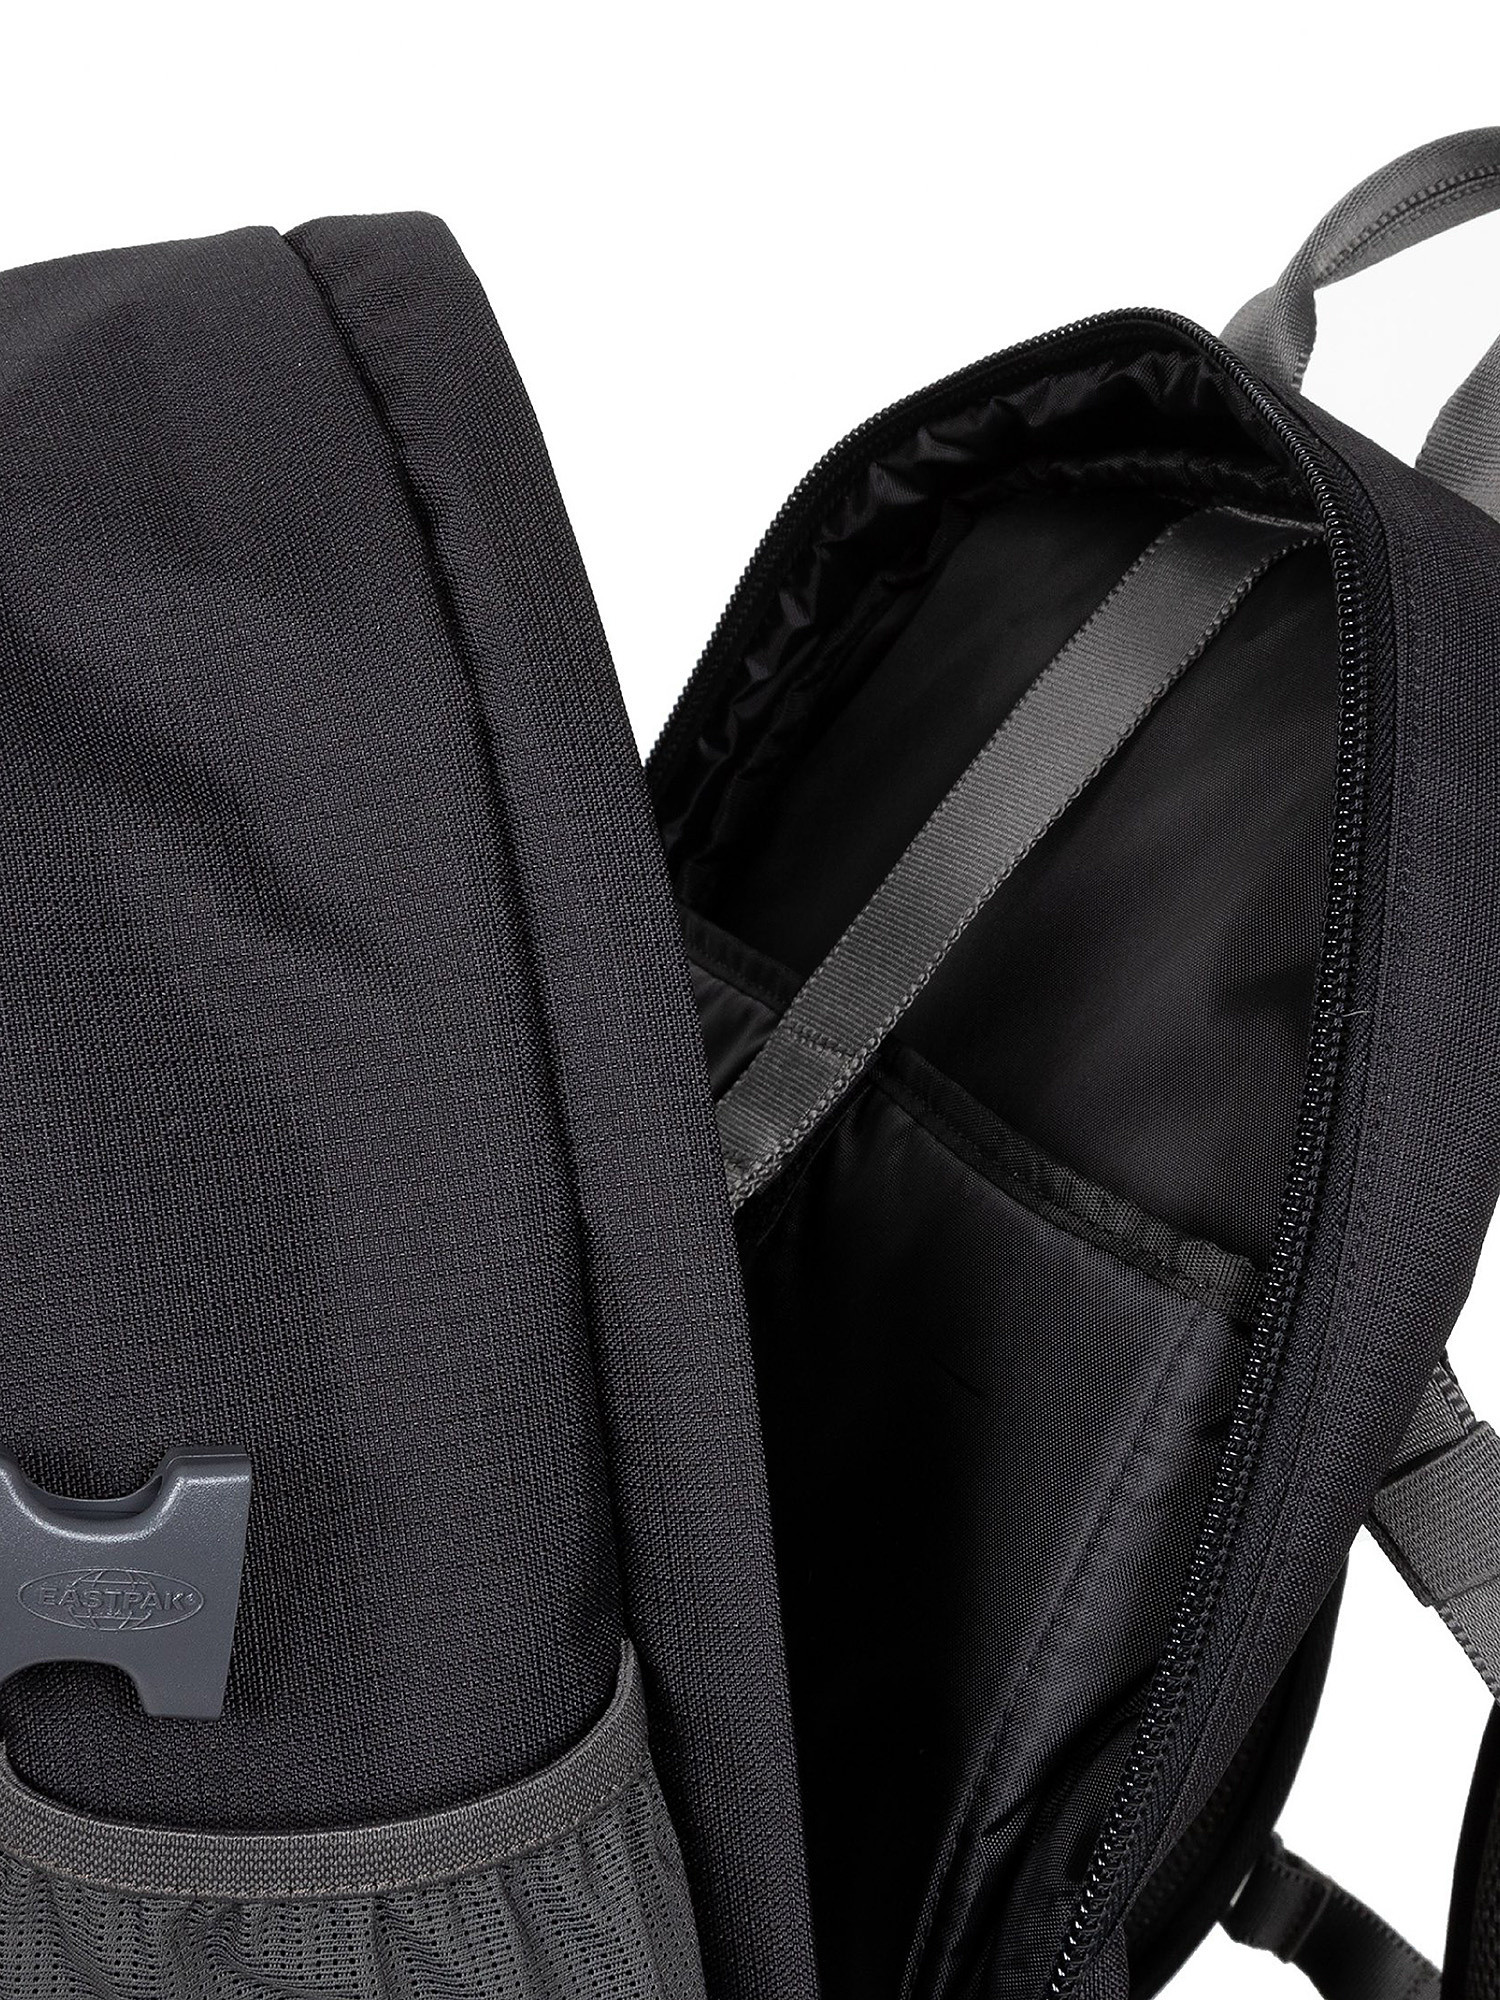 Eastpak - Zaino Out Safepack Out Black, Nero, large image number 3